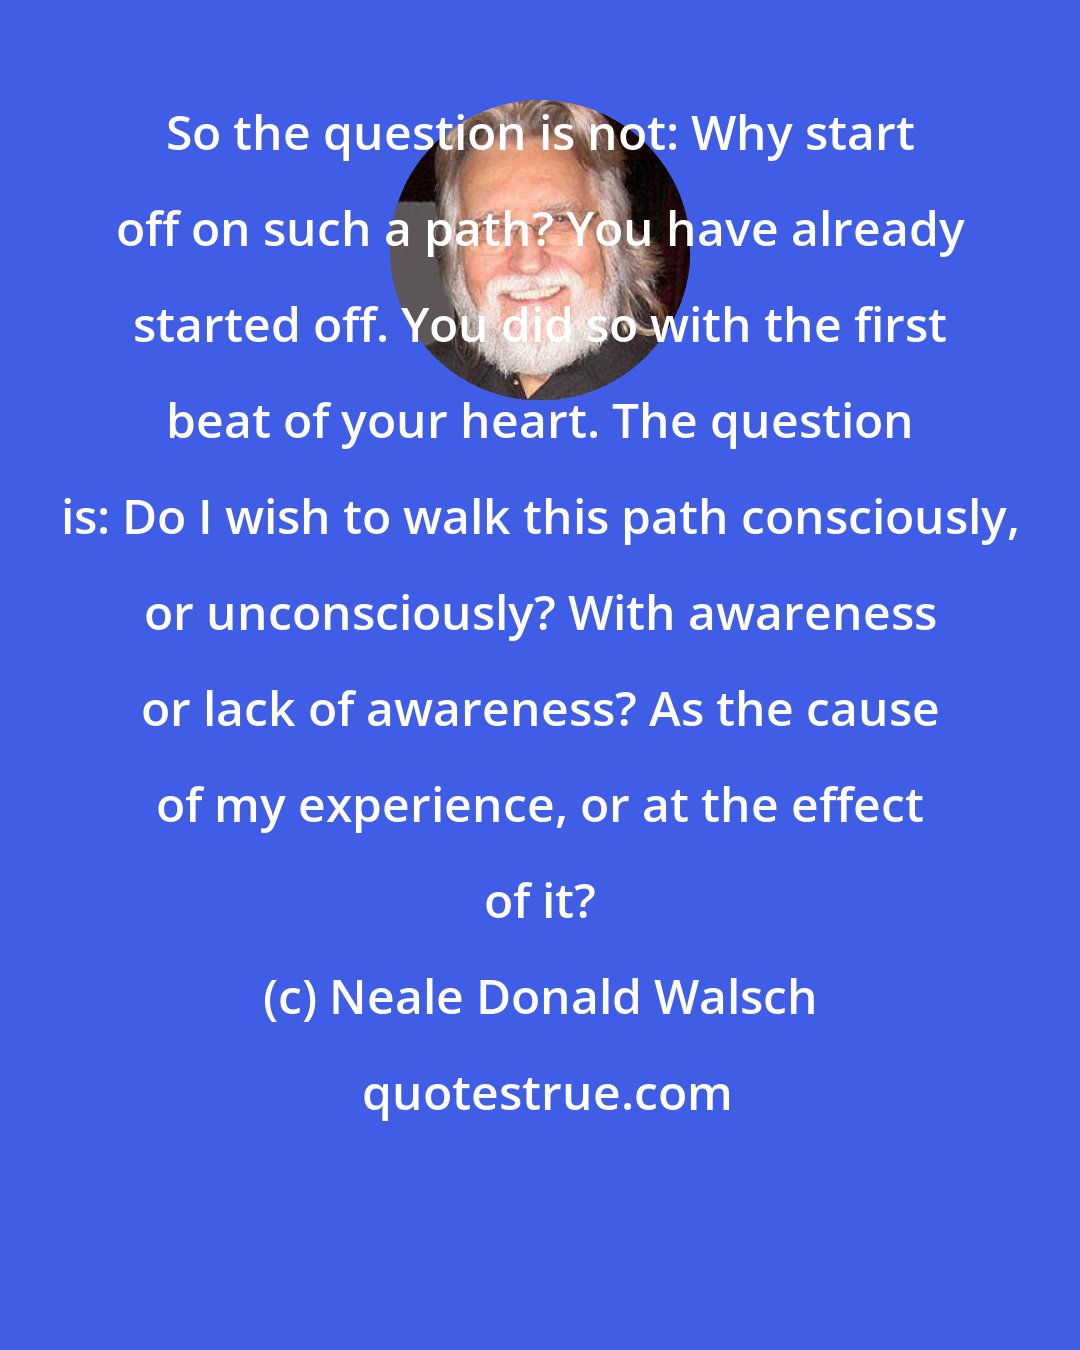 Neale Donald Walsch: So the question is not: Why start off on such a path? You have already started off. You did so with the first beat of your heart. The question is: Do I wish to walk this path consciously, or unconsciously? With awareness or lack of awareness? As the cause of my experience, or at the effect of it?